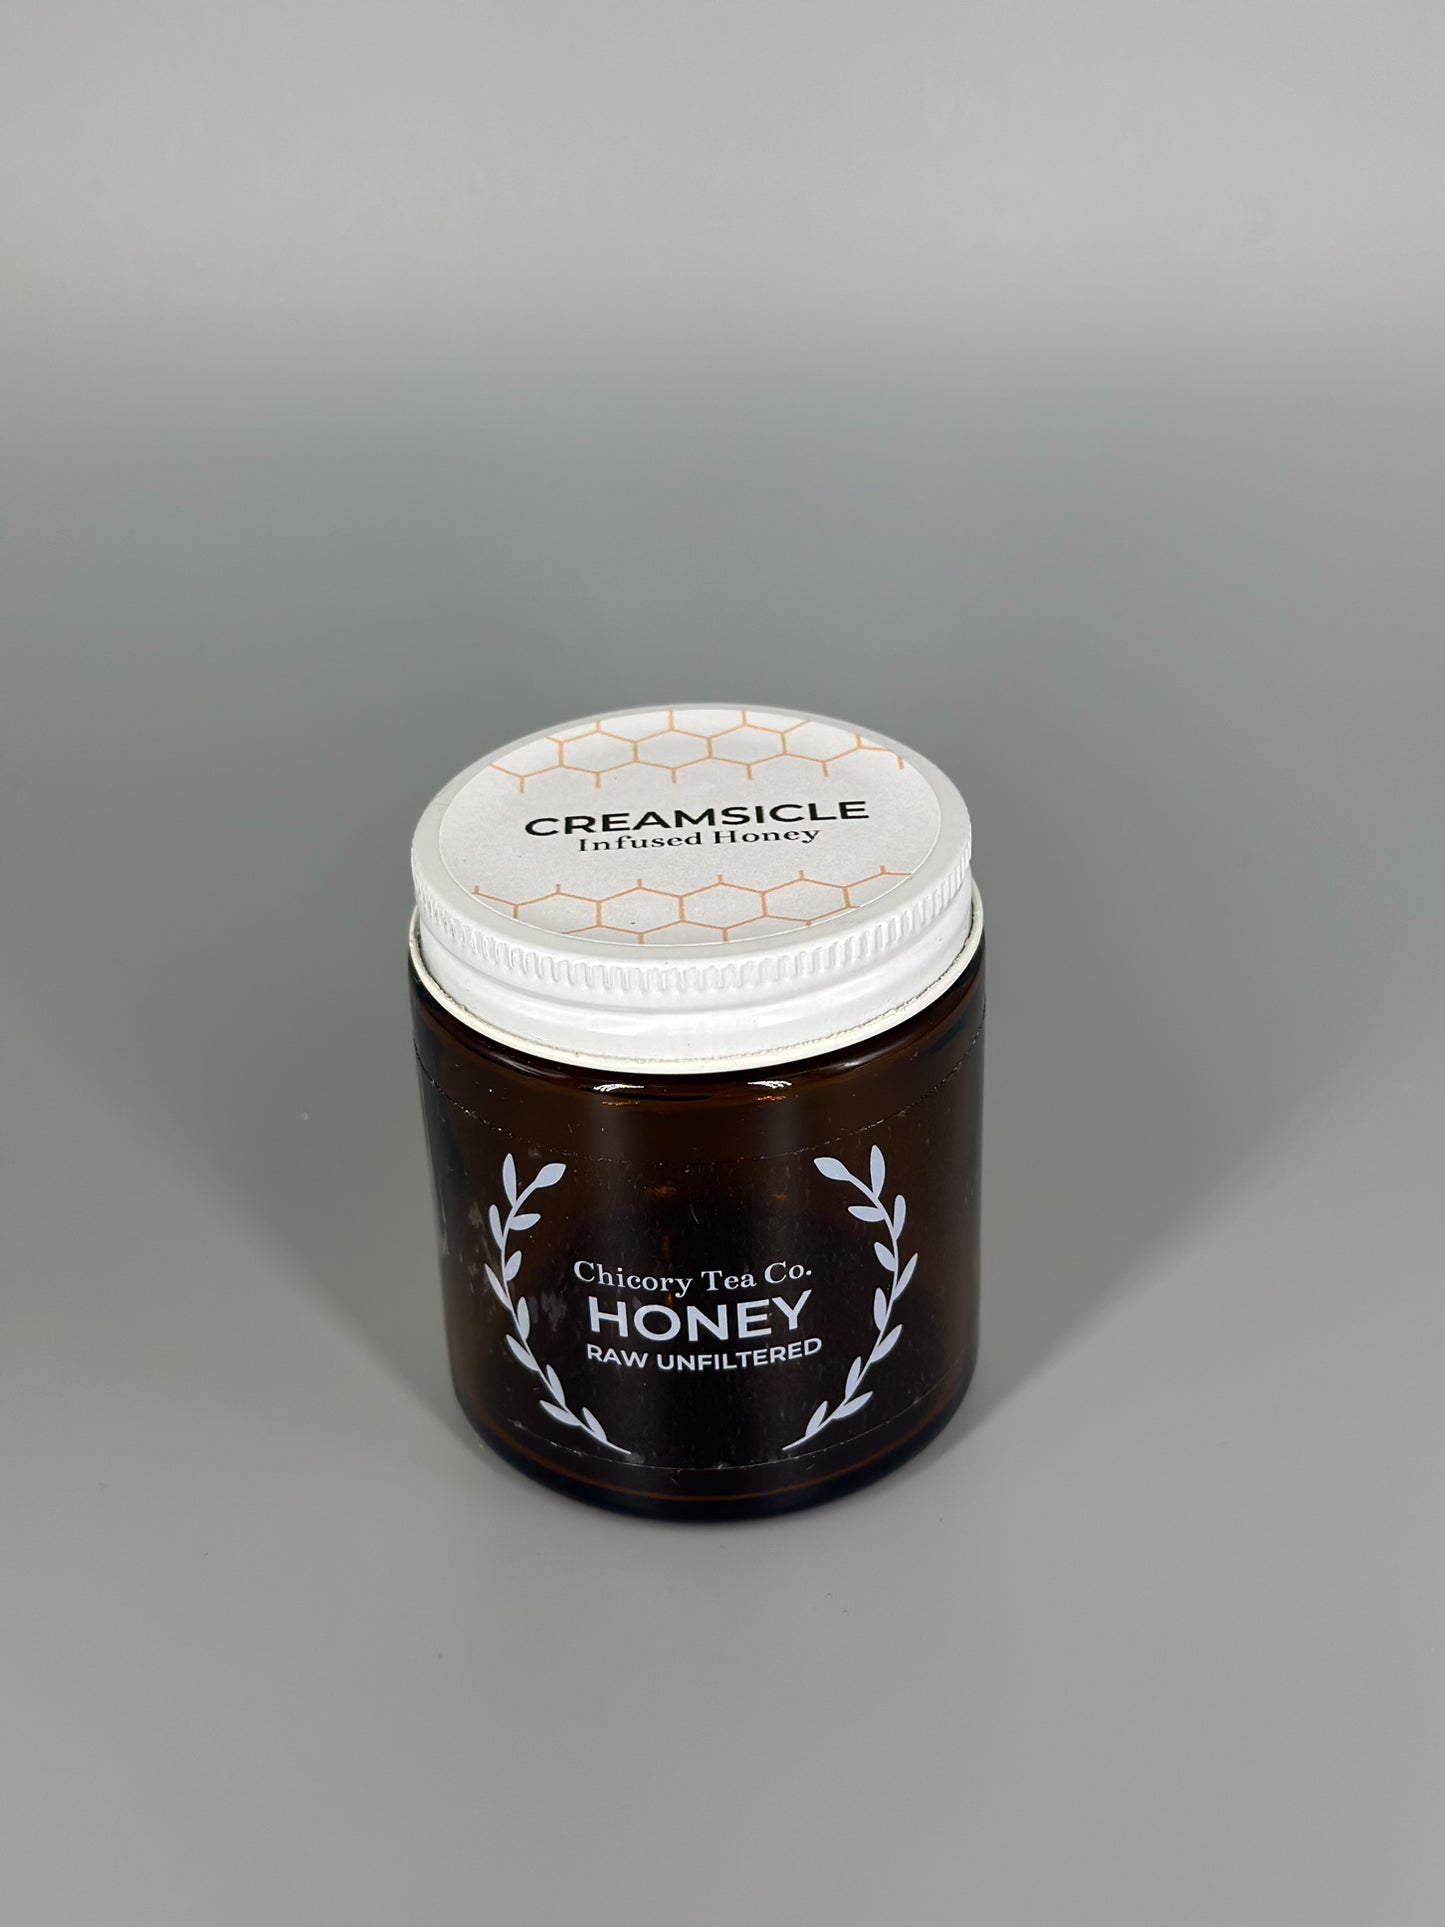 Chicory Tea Co.'s Creamsicle Honey in the jar, view from the front